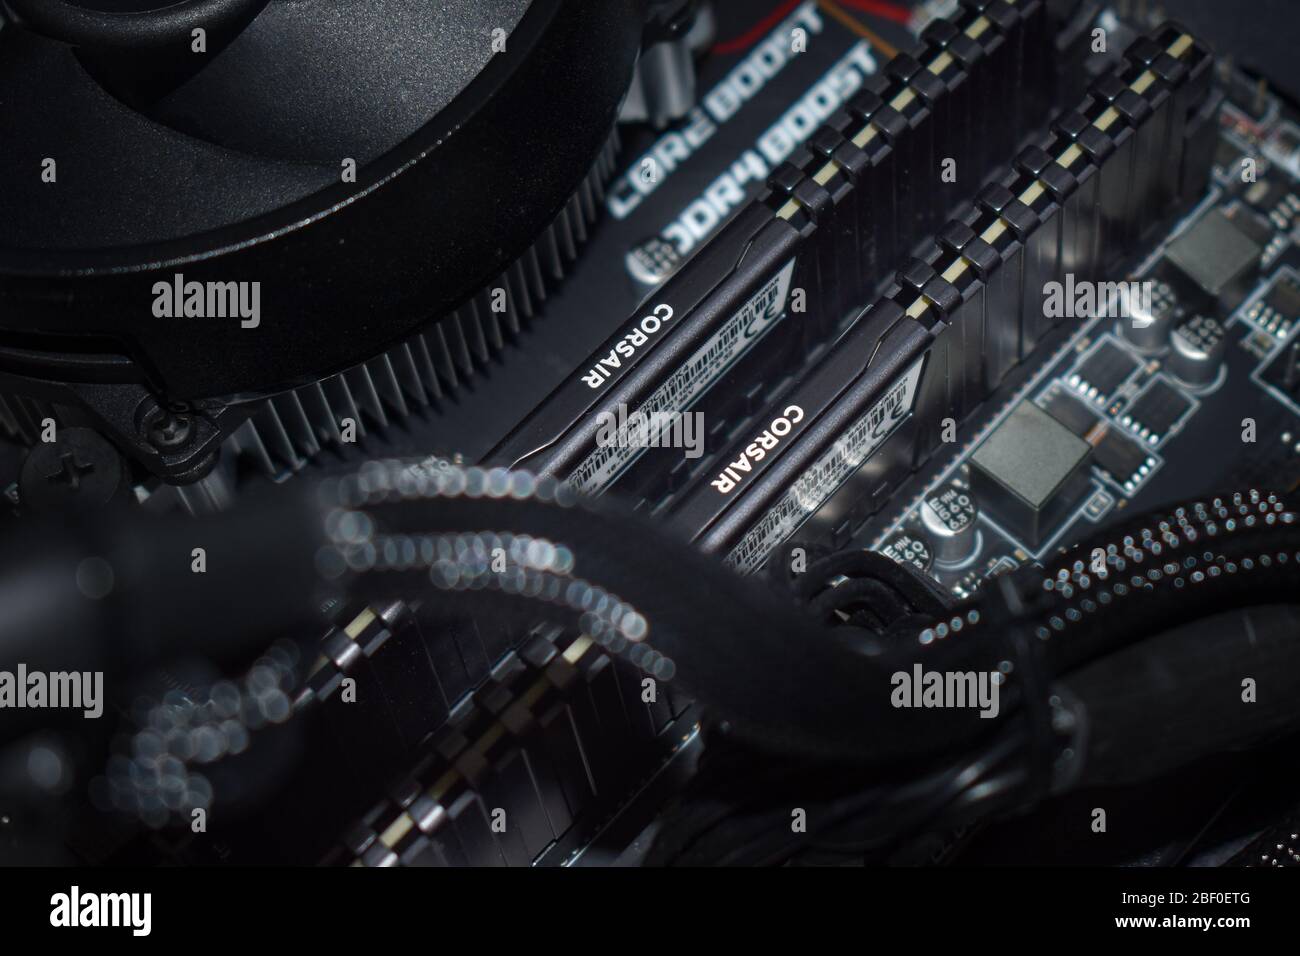 Close up view of Corsair 3200mhz Ram in a gaming pc Stock Photo